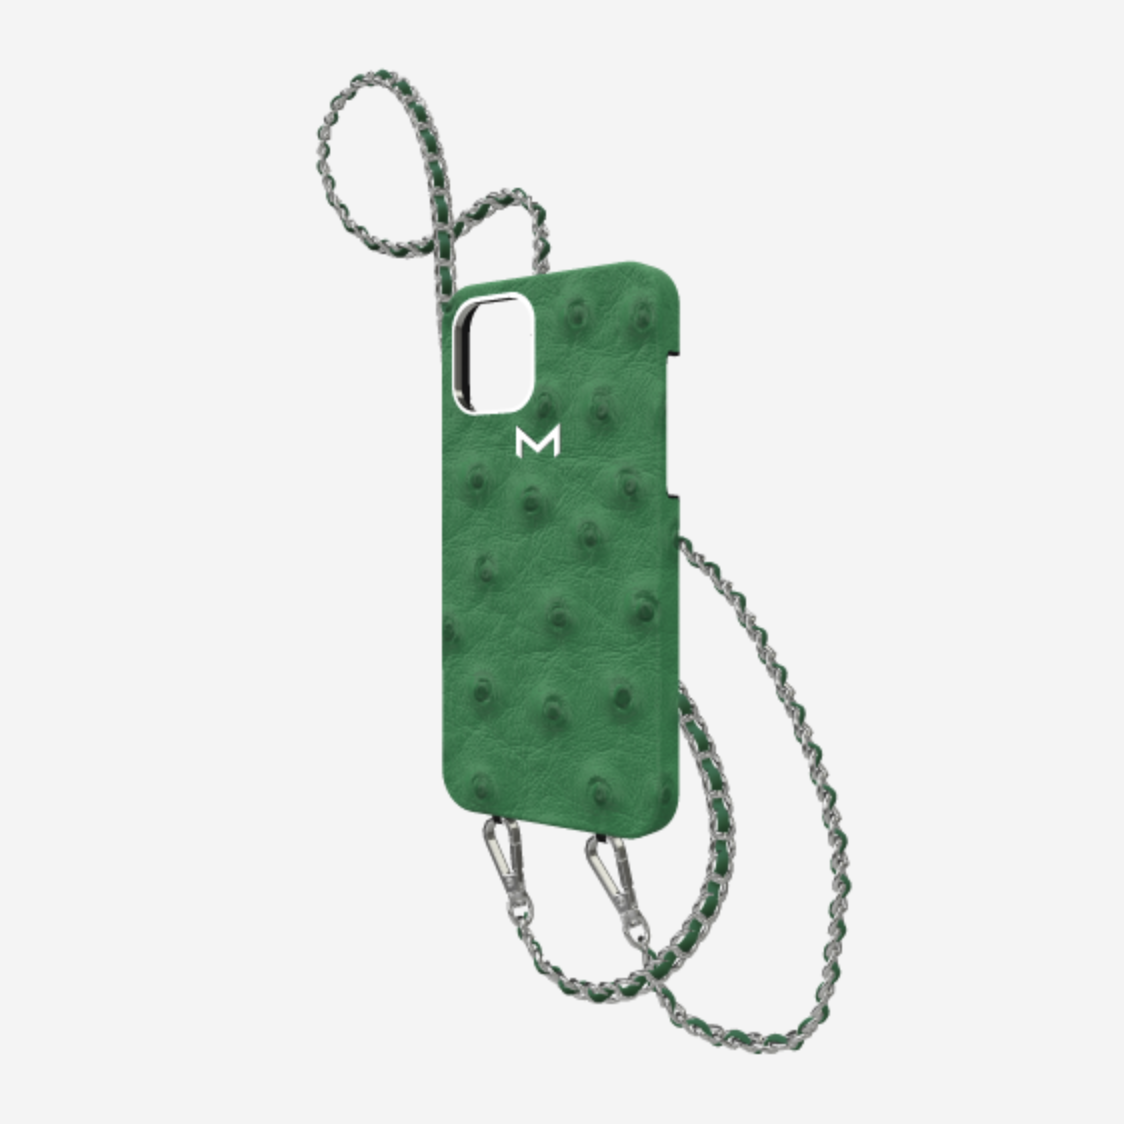 Classic Necklace Case for iPhone 12 Pro Max in Genuine Ostrich Emerald Green Steel 316 